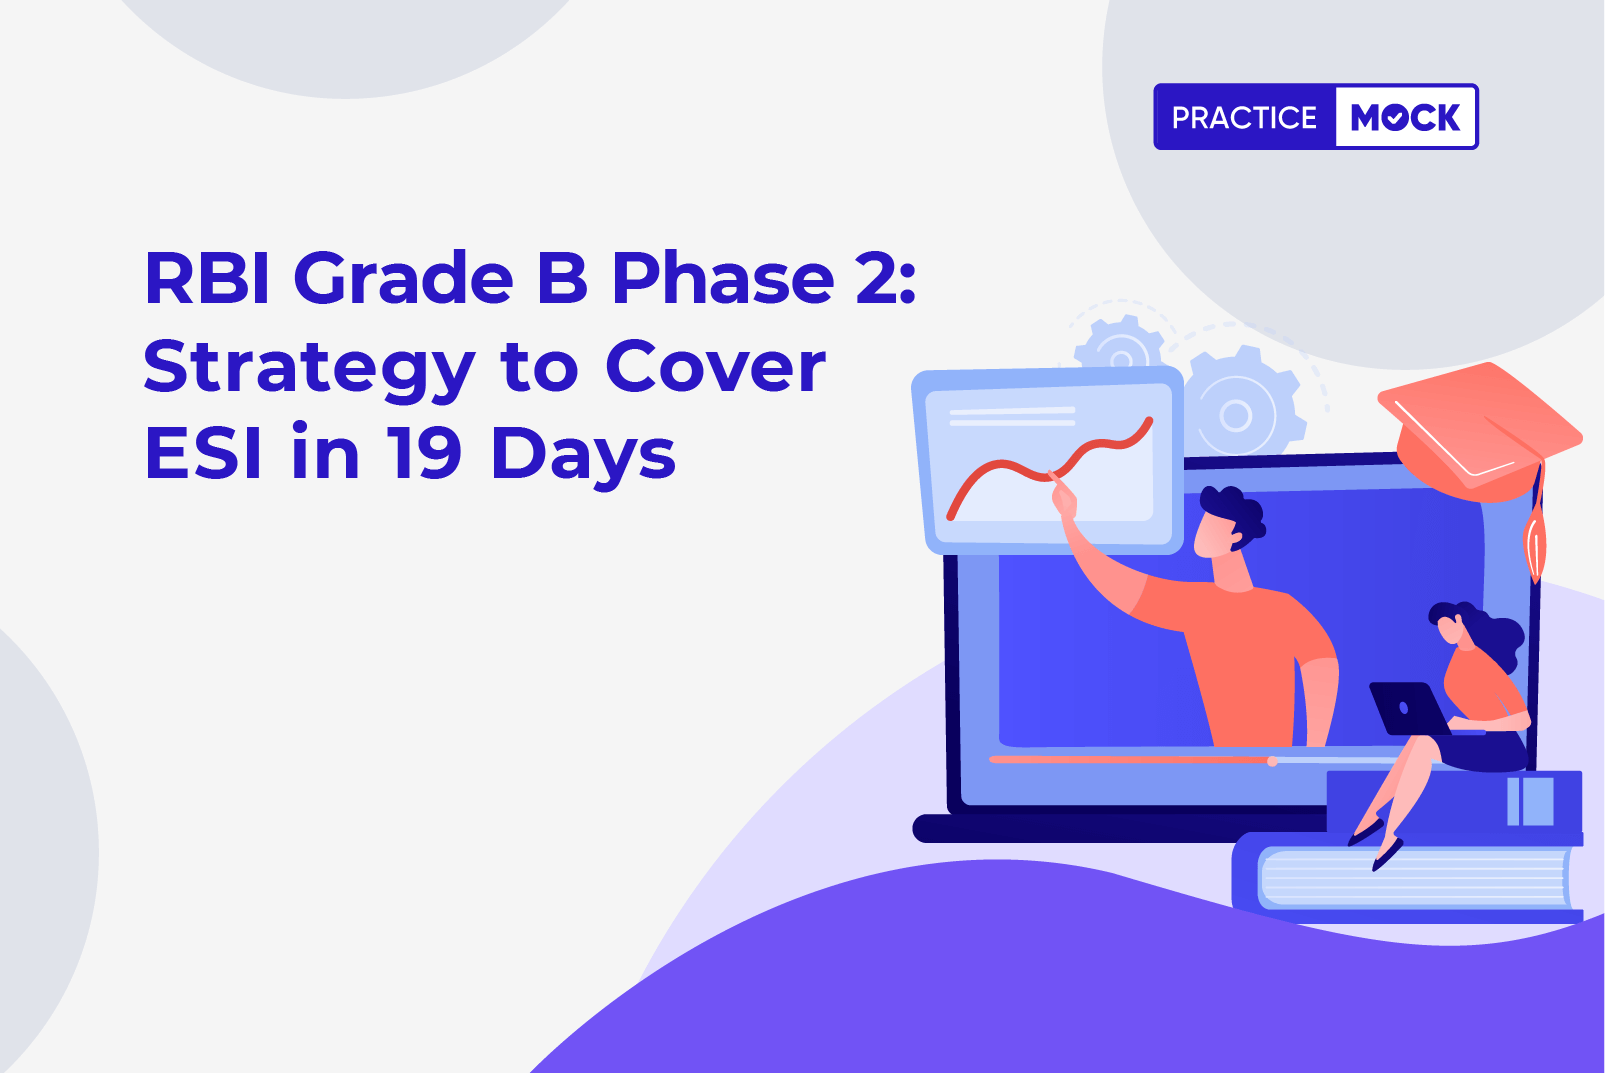 RBI Grade B Phase 2 Strategy to Cover ESI in 19 Days!!